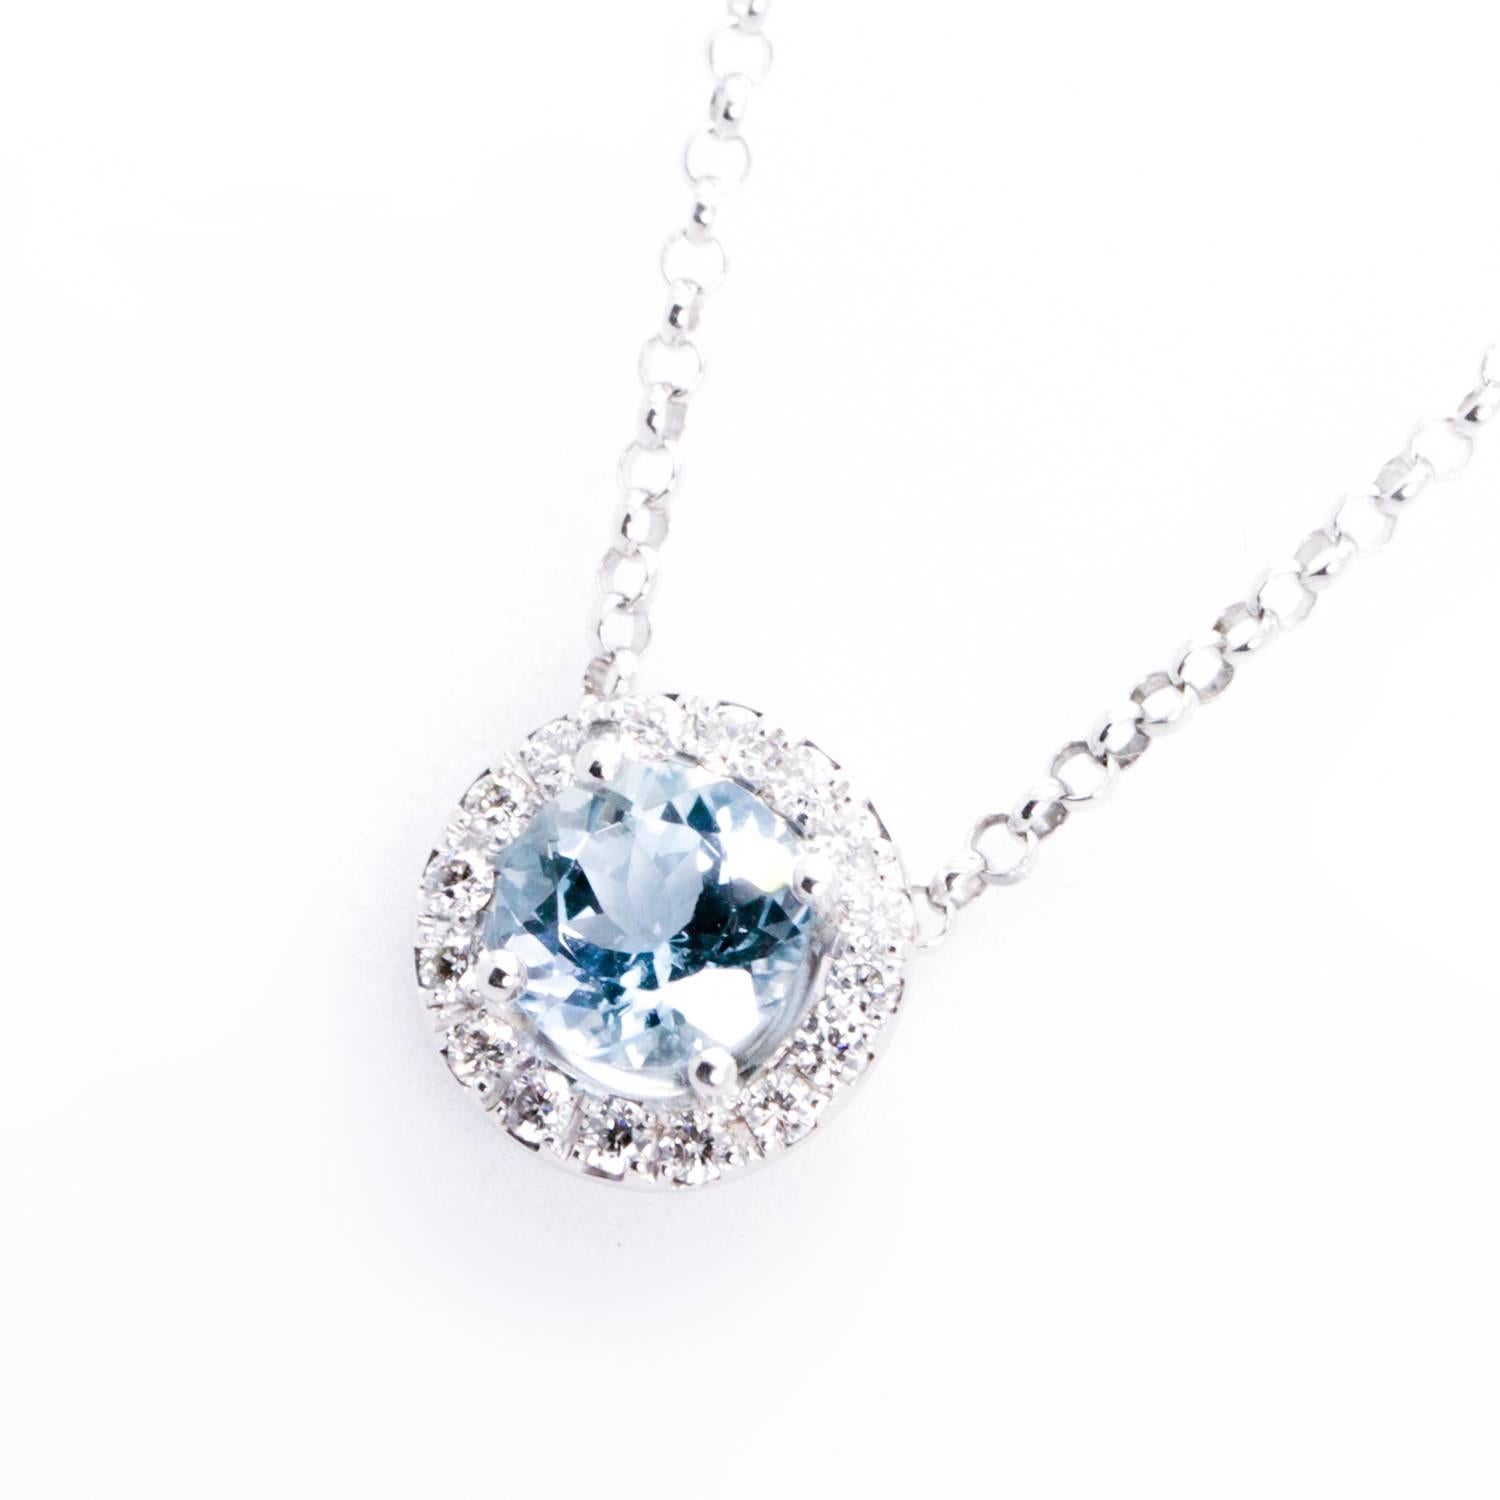 An 18ct White gold ladies Aquamarine and Diamond pendant.  Very nice Estate age (made in the last 50 years) Pendant necklace.  Lovely necklace, the kind that you put around your neck and never take it off.  Easy to wear, intrinsically valuable, and